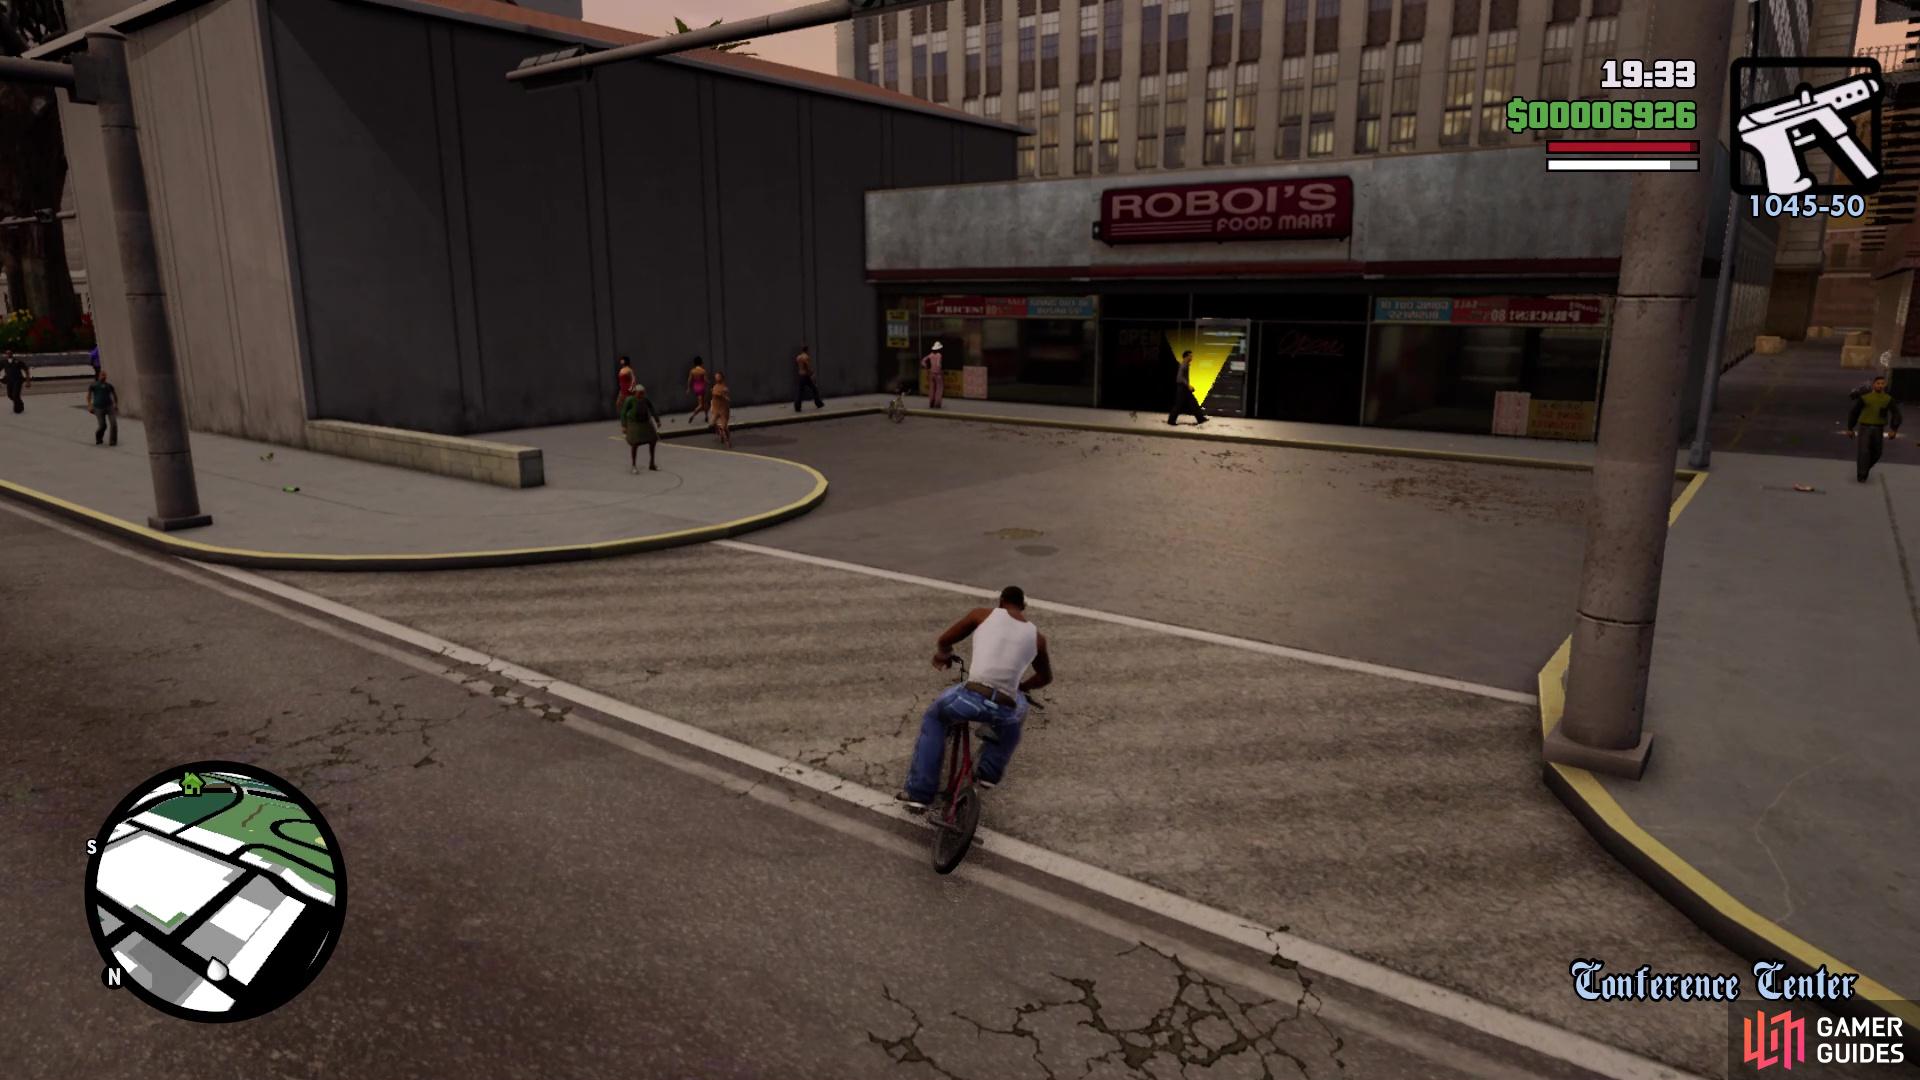 Get on the bike in front of the shop to start the mission